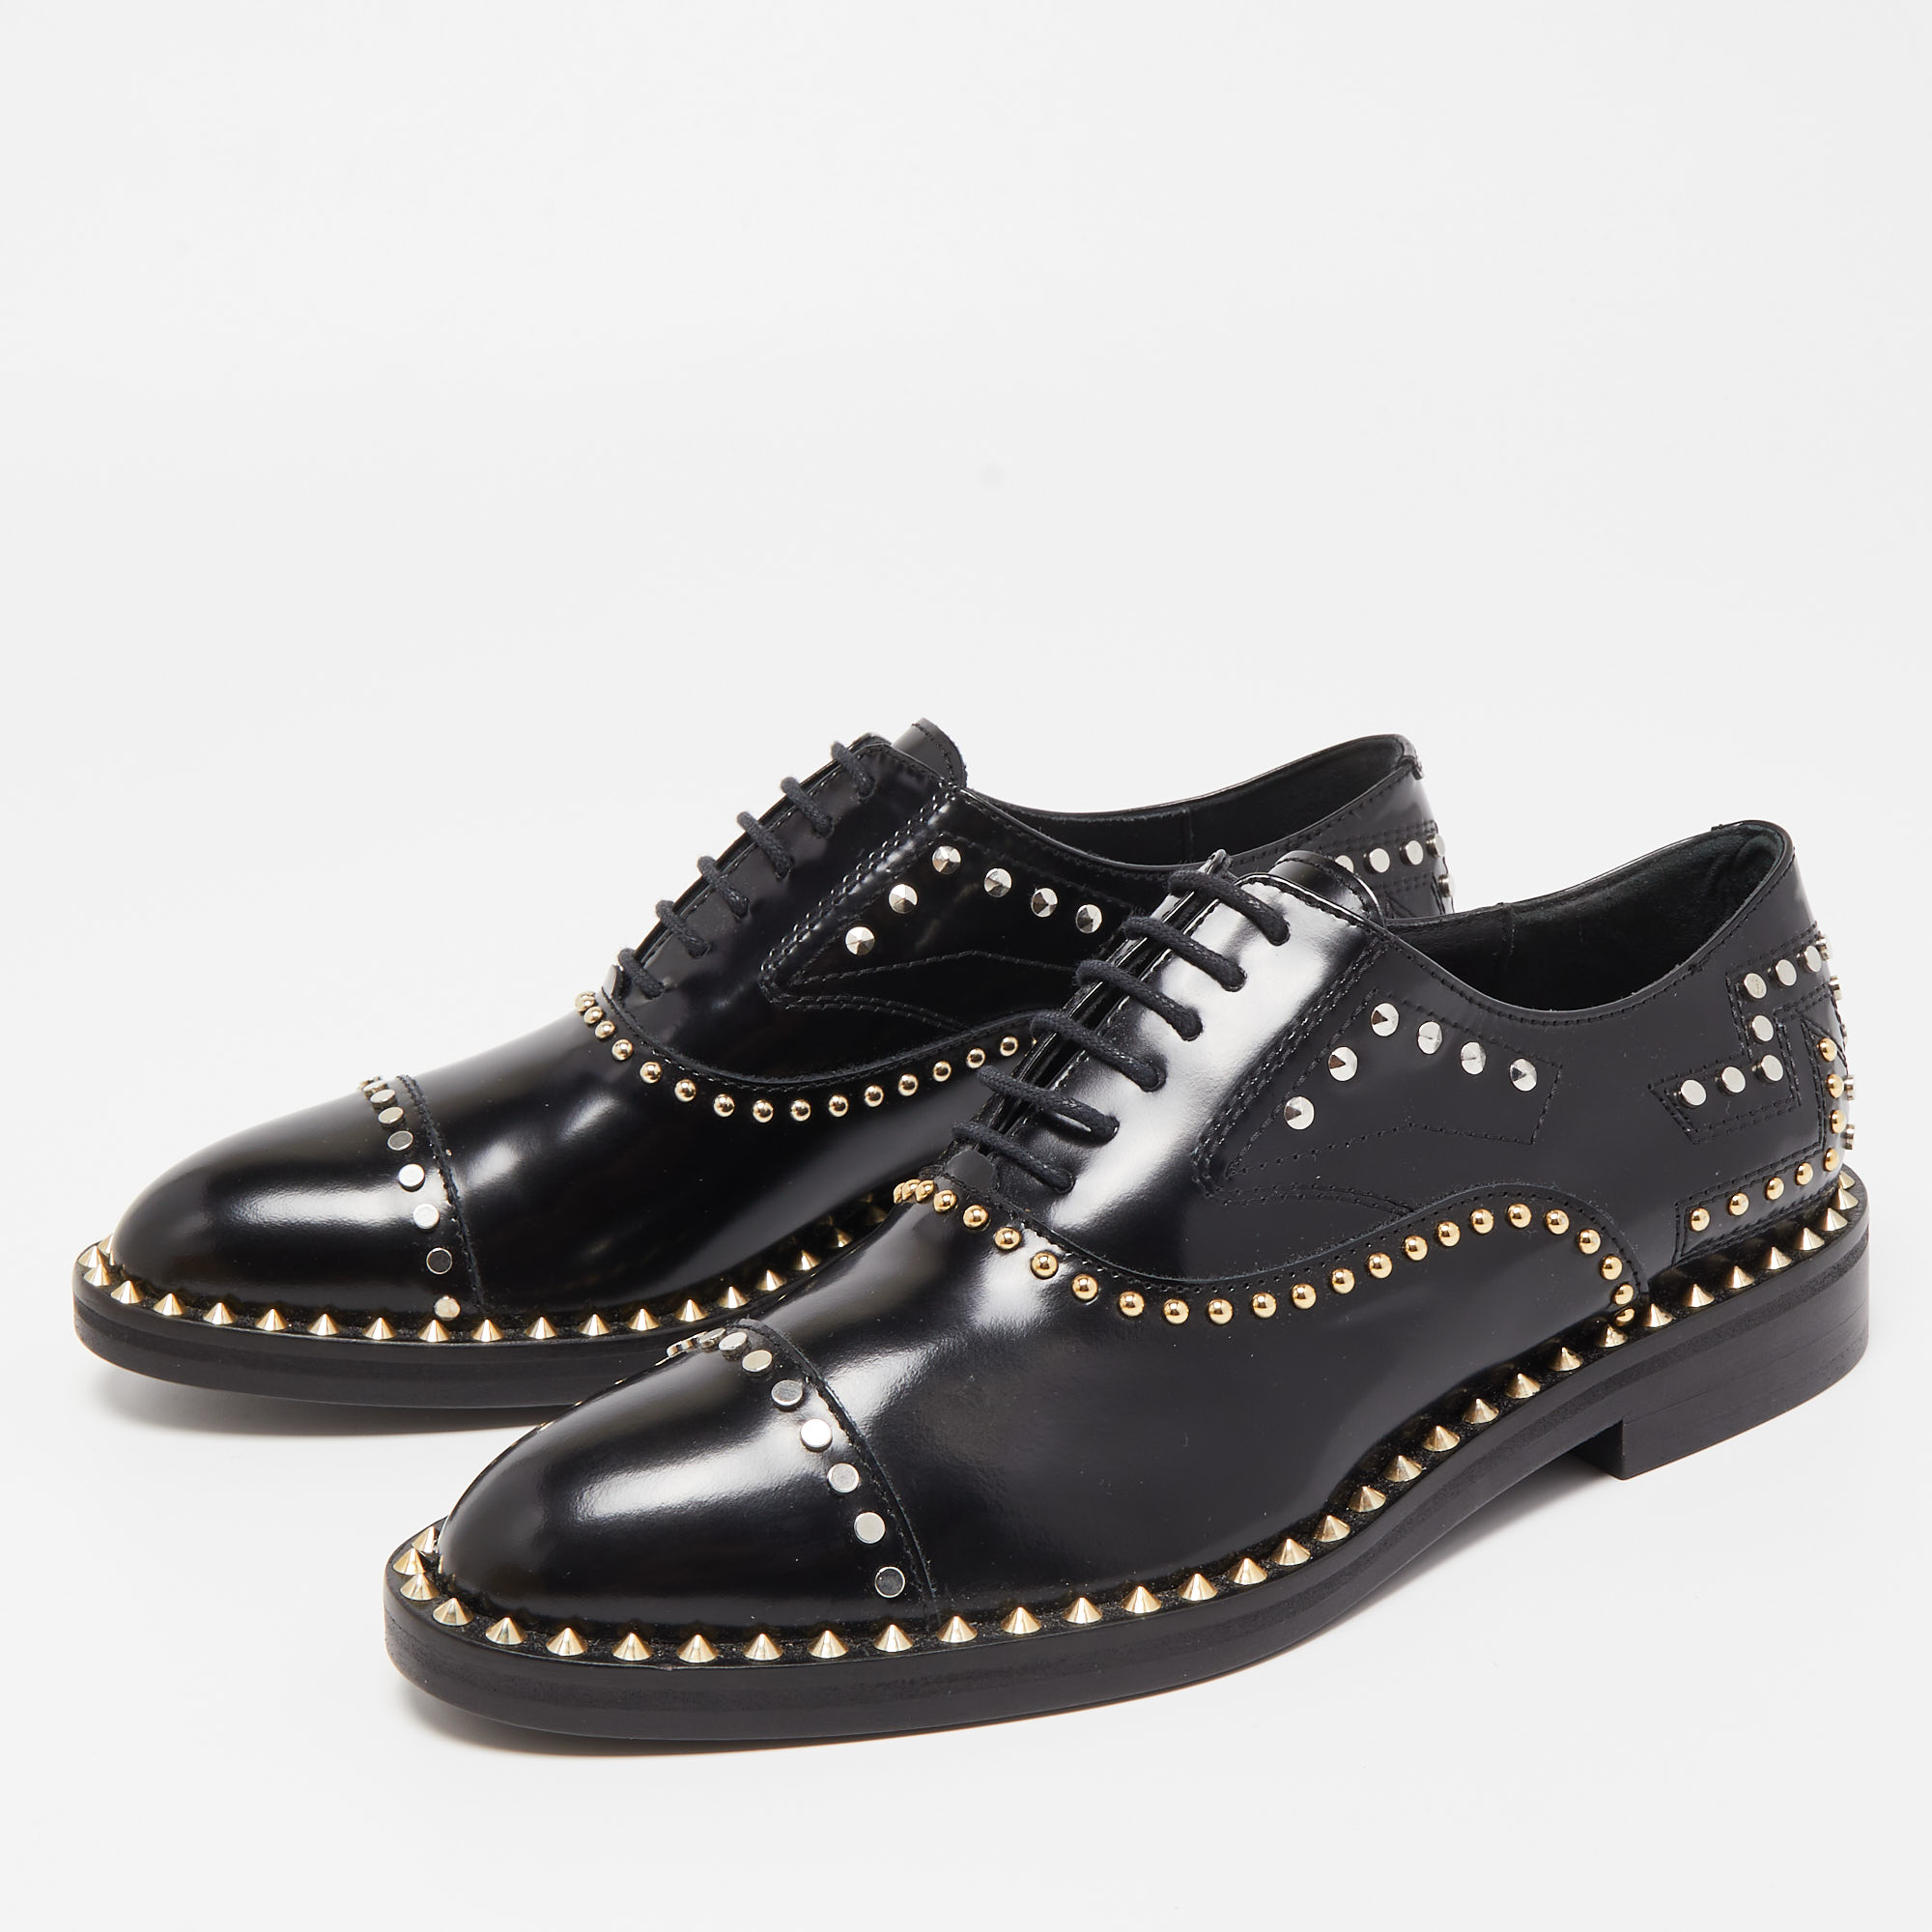 

Zadig & Voltaire Black Leather Studded Lace Up Oxfords Size